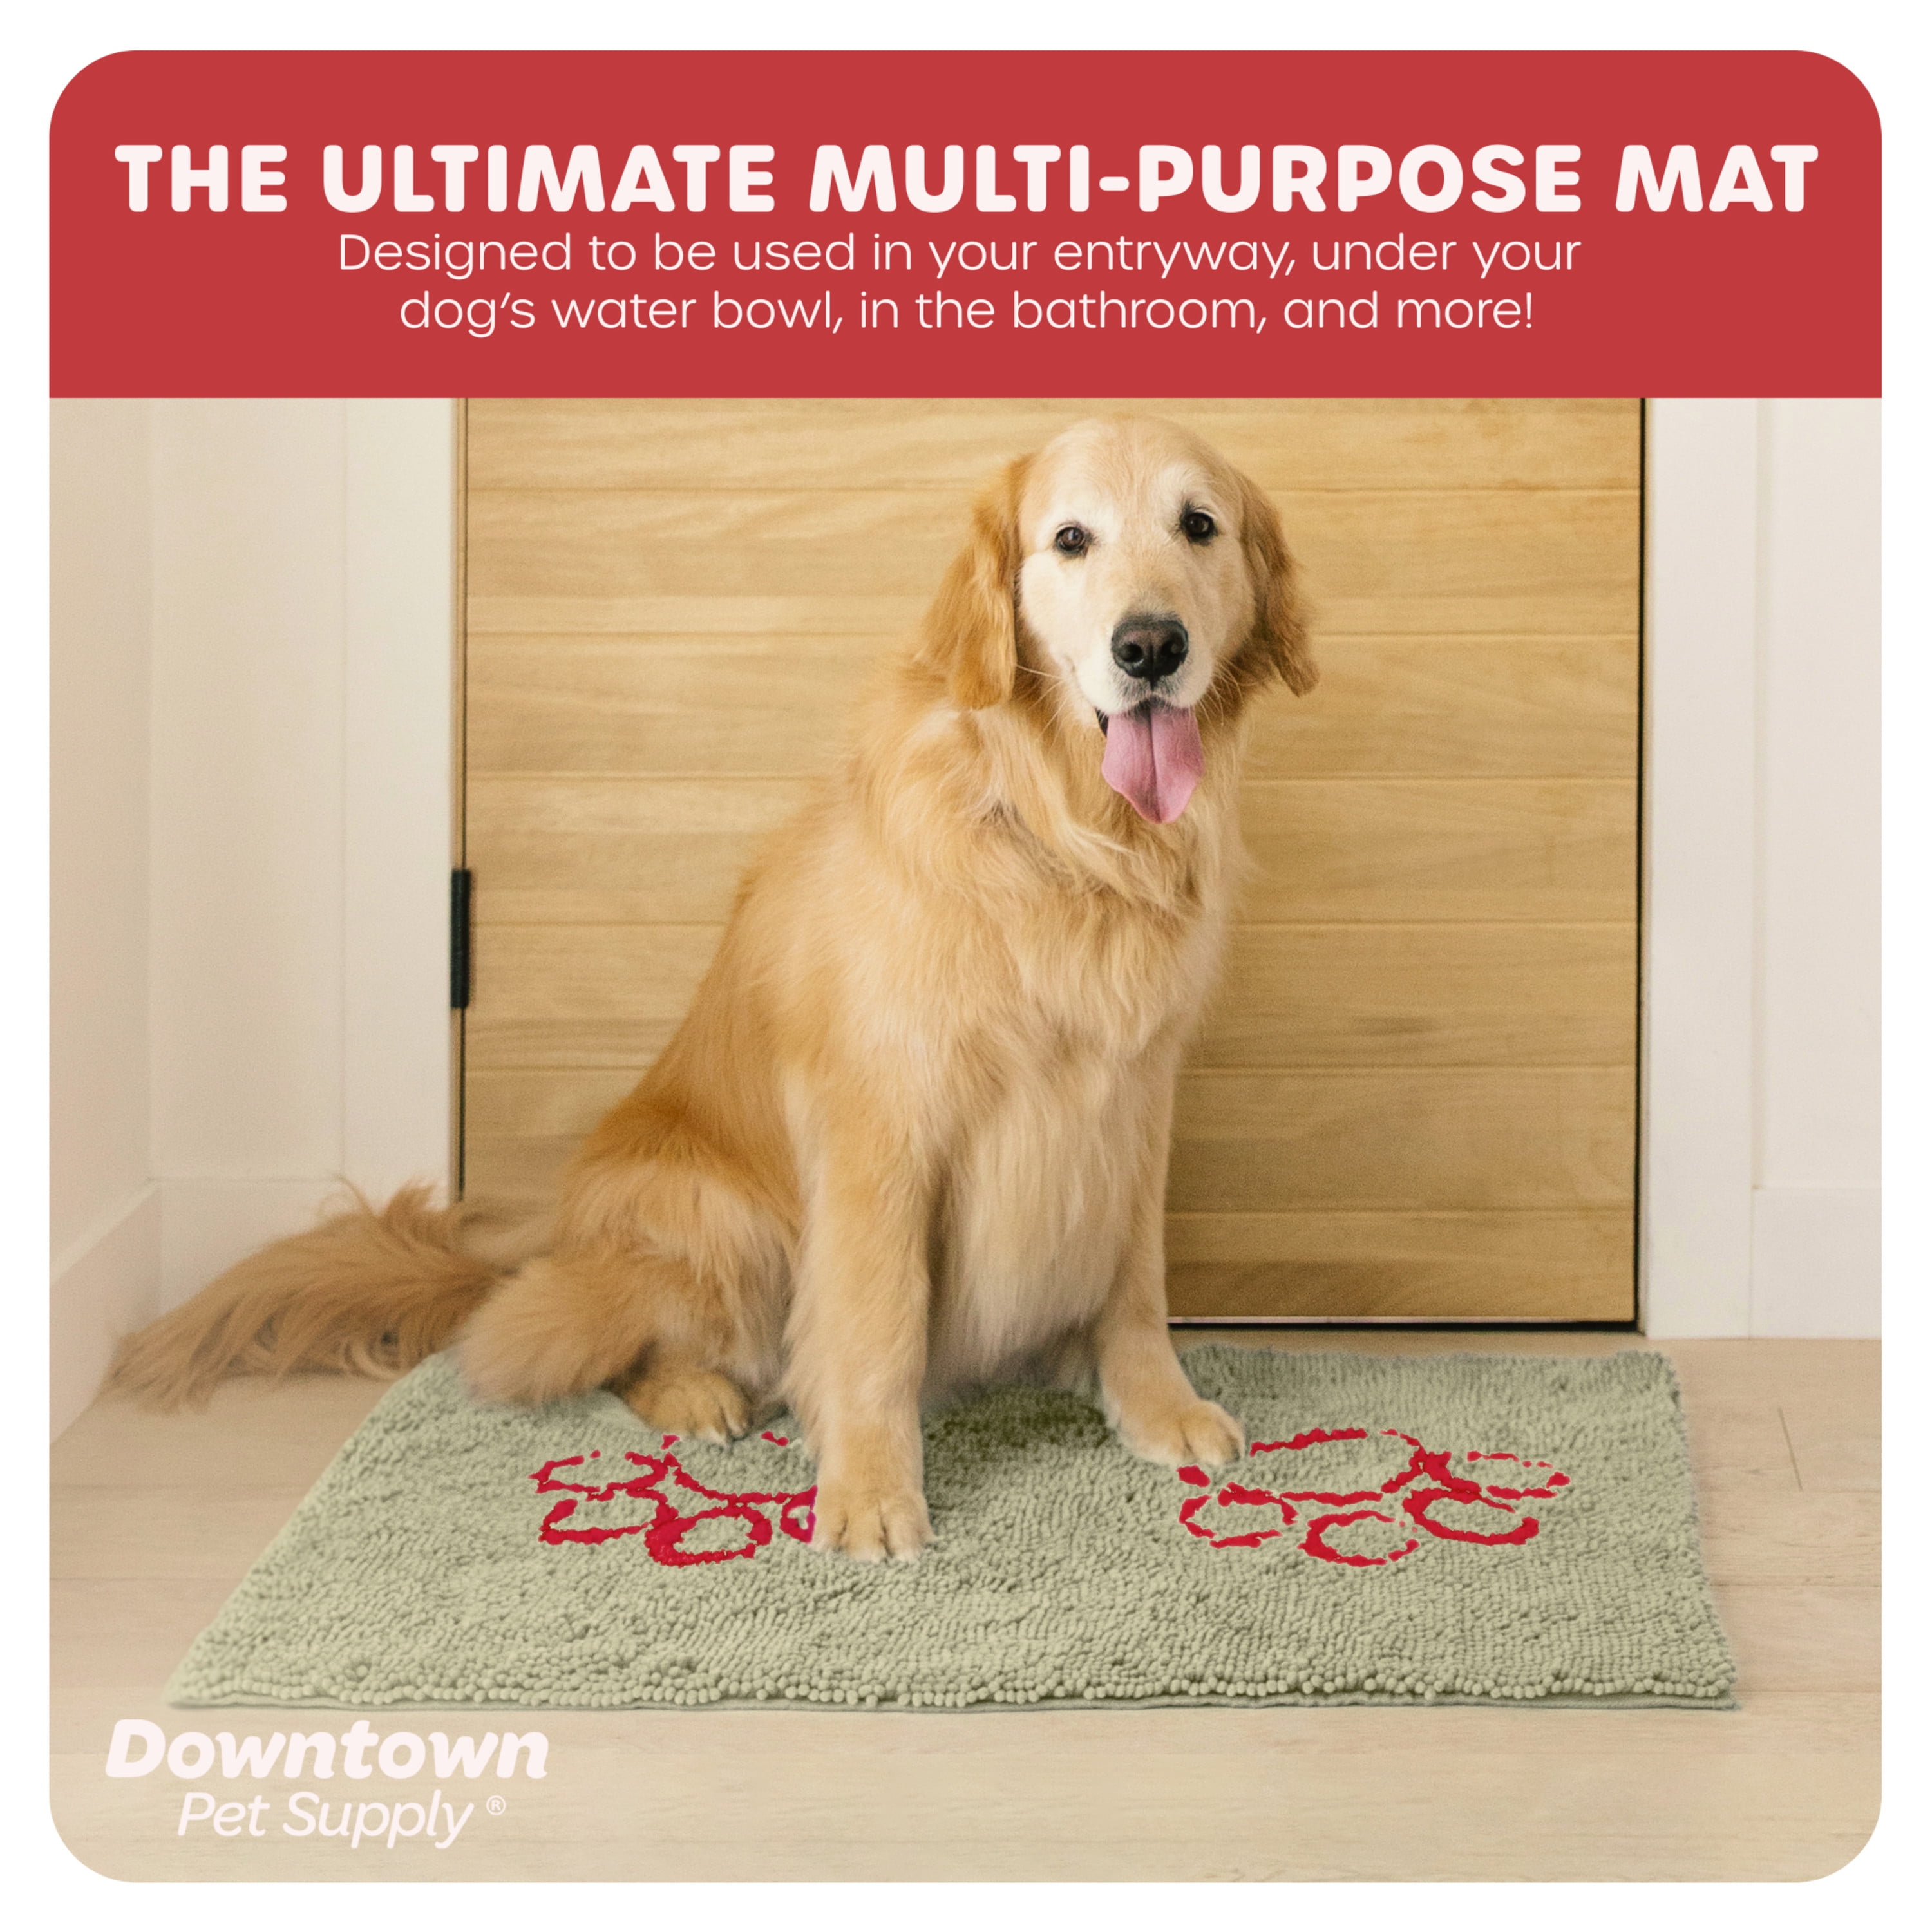 My Doggy Place Ultra-Absorbent Dog Doormat: Oatmeal/Large